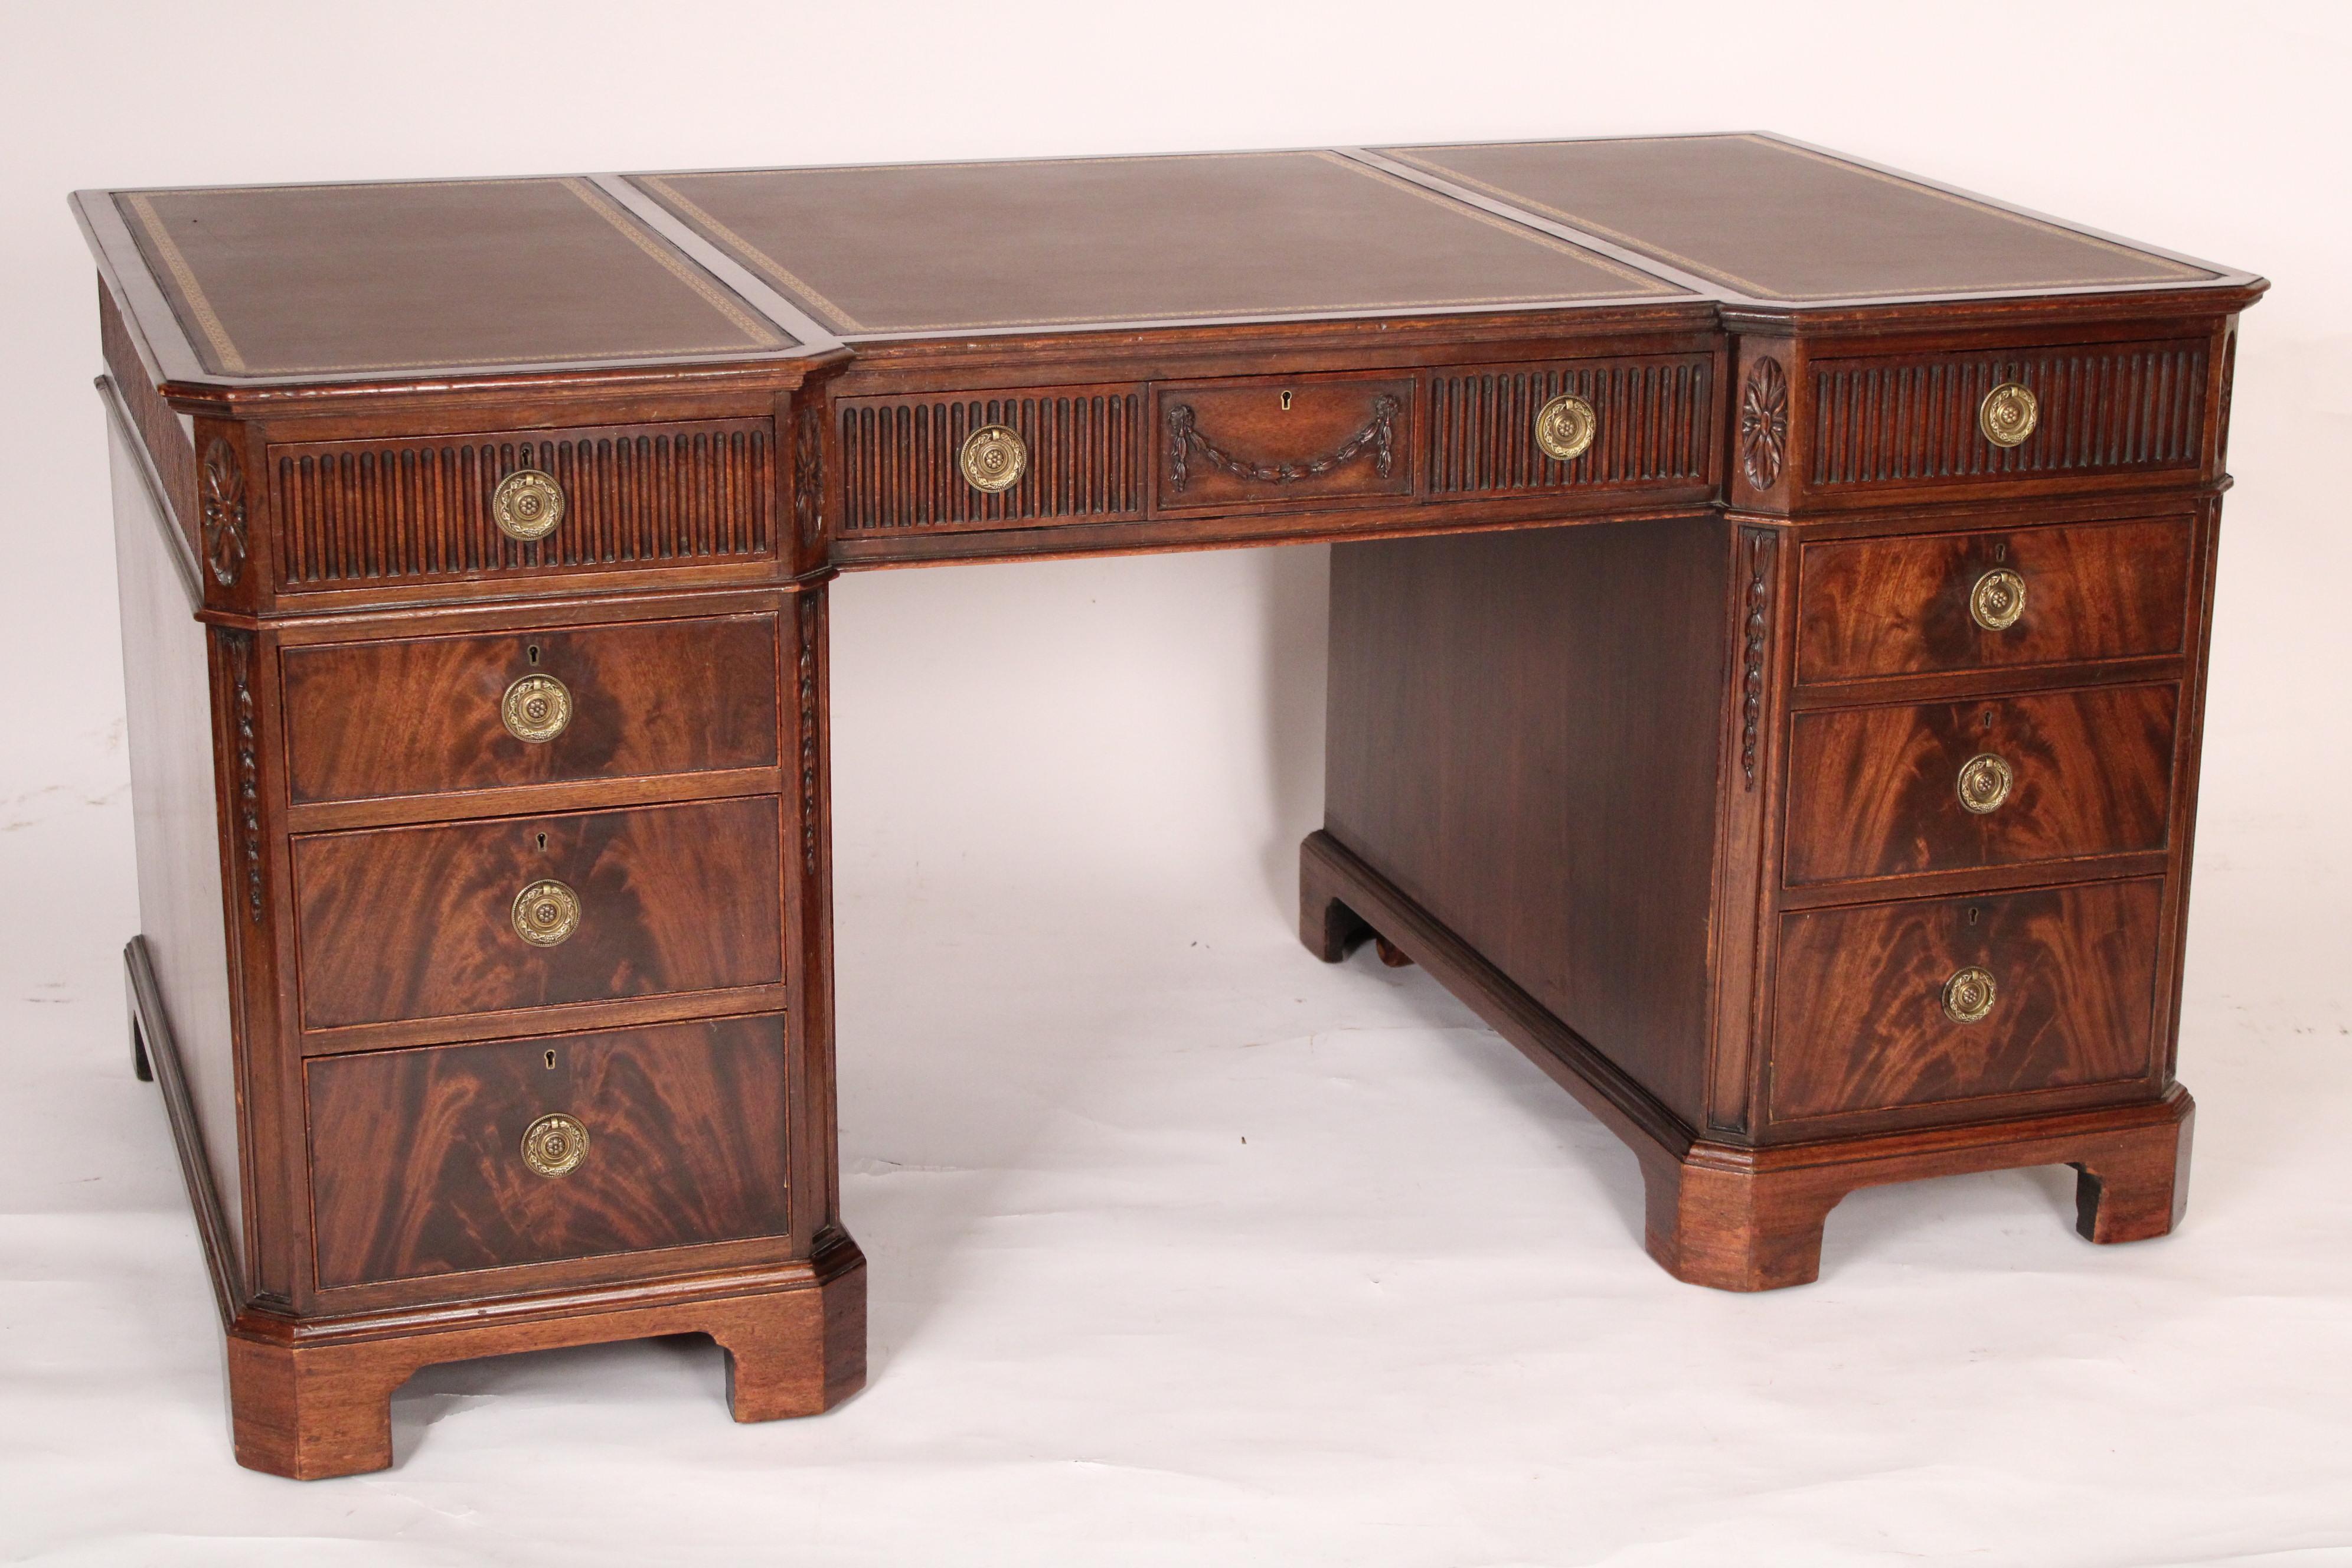 George II style mahogany double pedestal desk with a tooled leather top, circa 1910. The top with 3 sections of tooled leather, 3 frieze drawers the center frieze drawer with a carved swag, the 3 lower drawers on each side of knee hole with matched